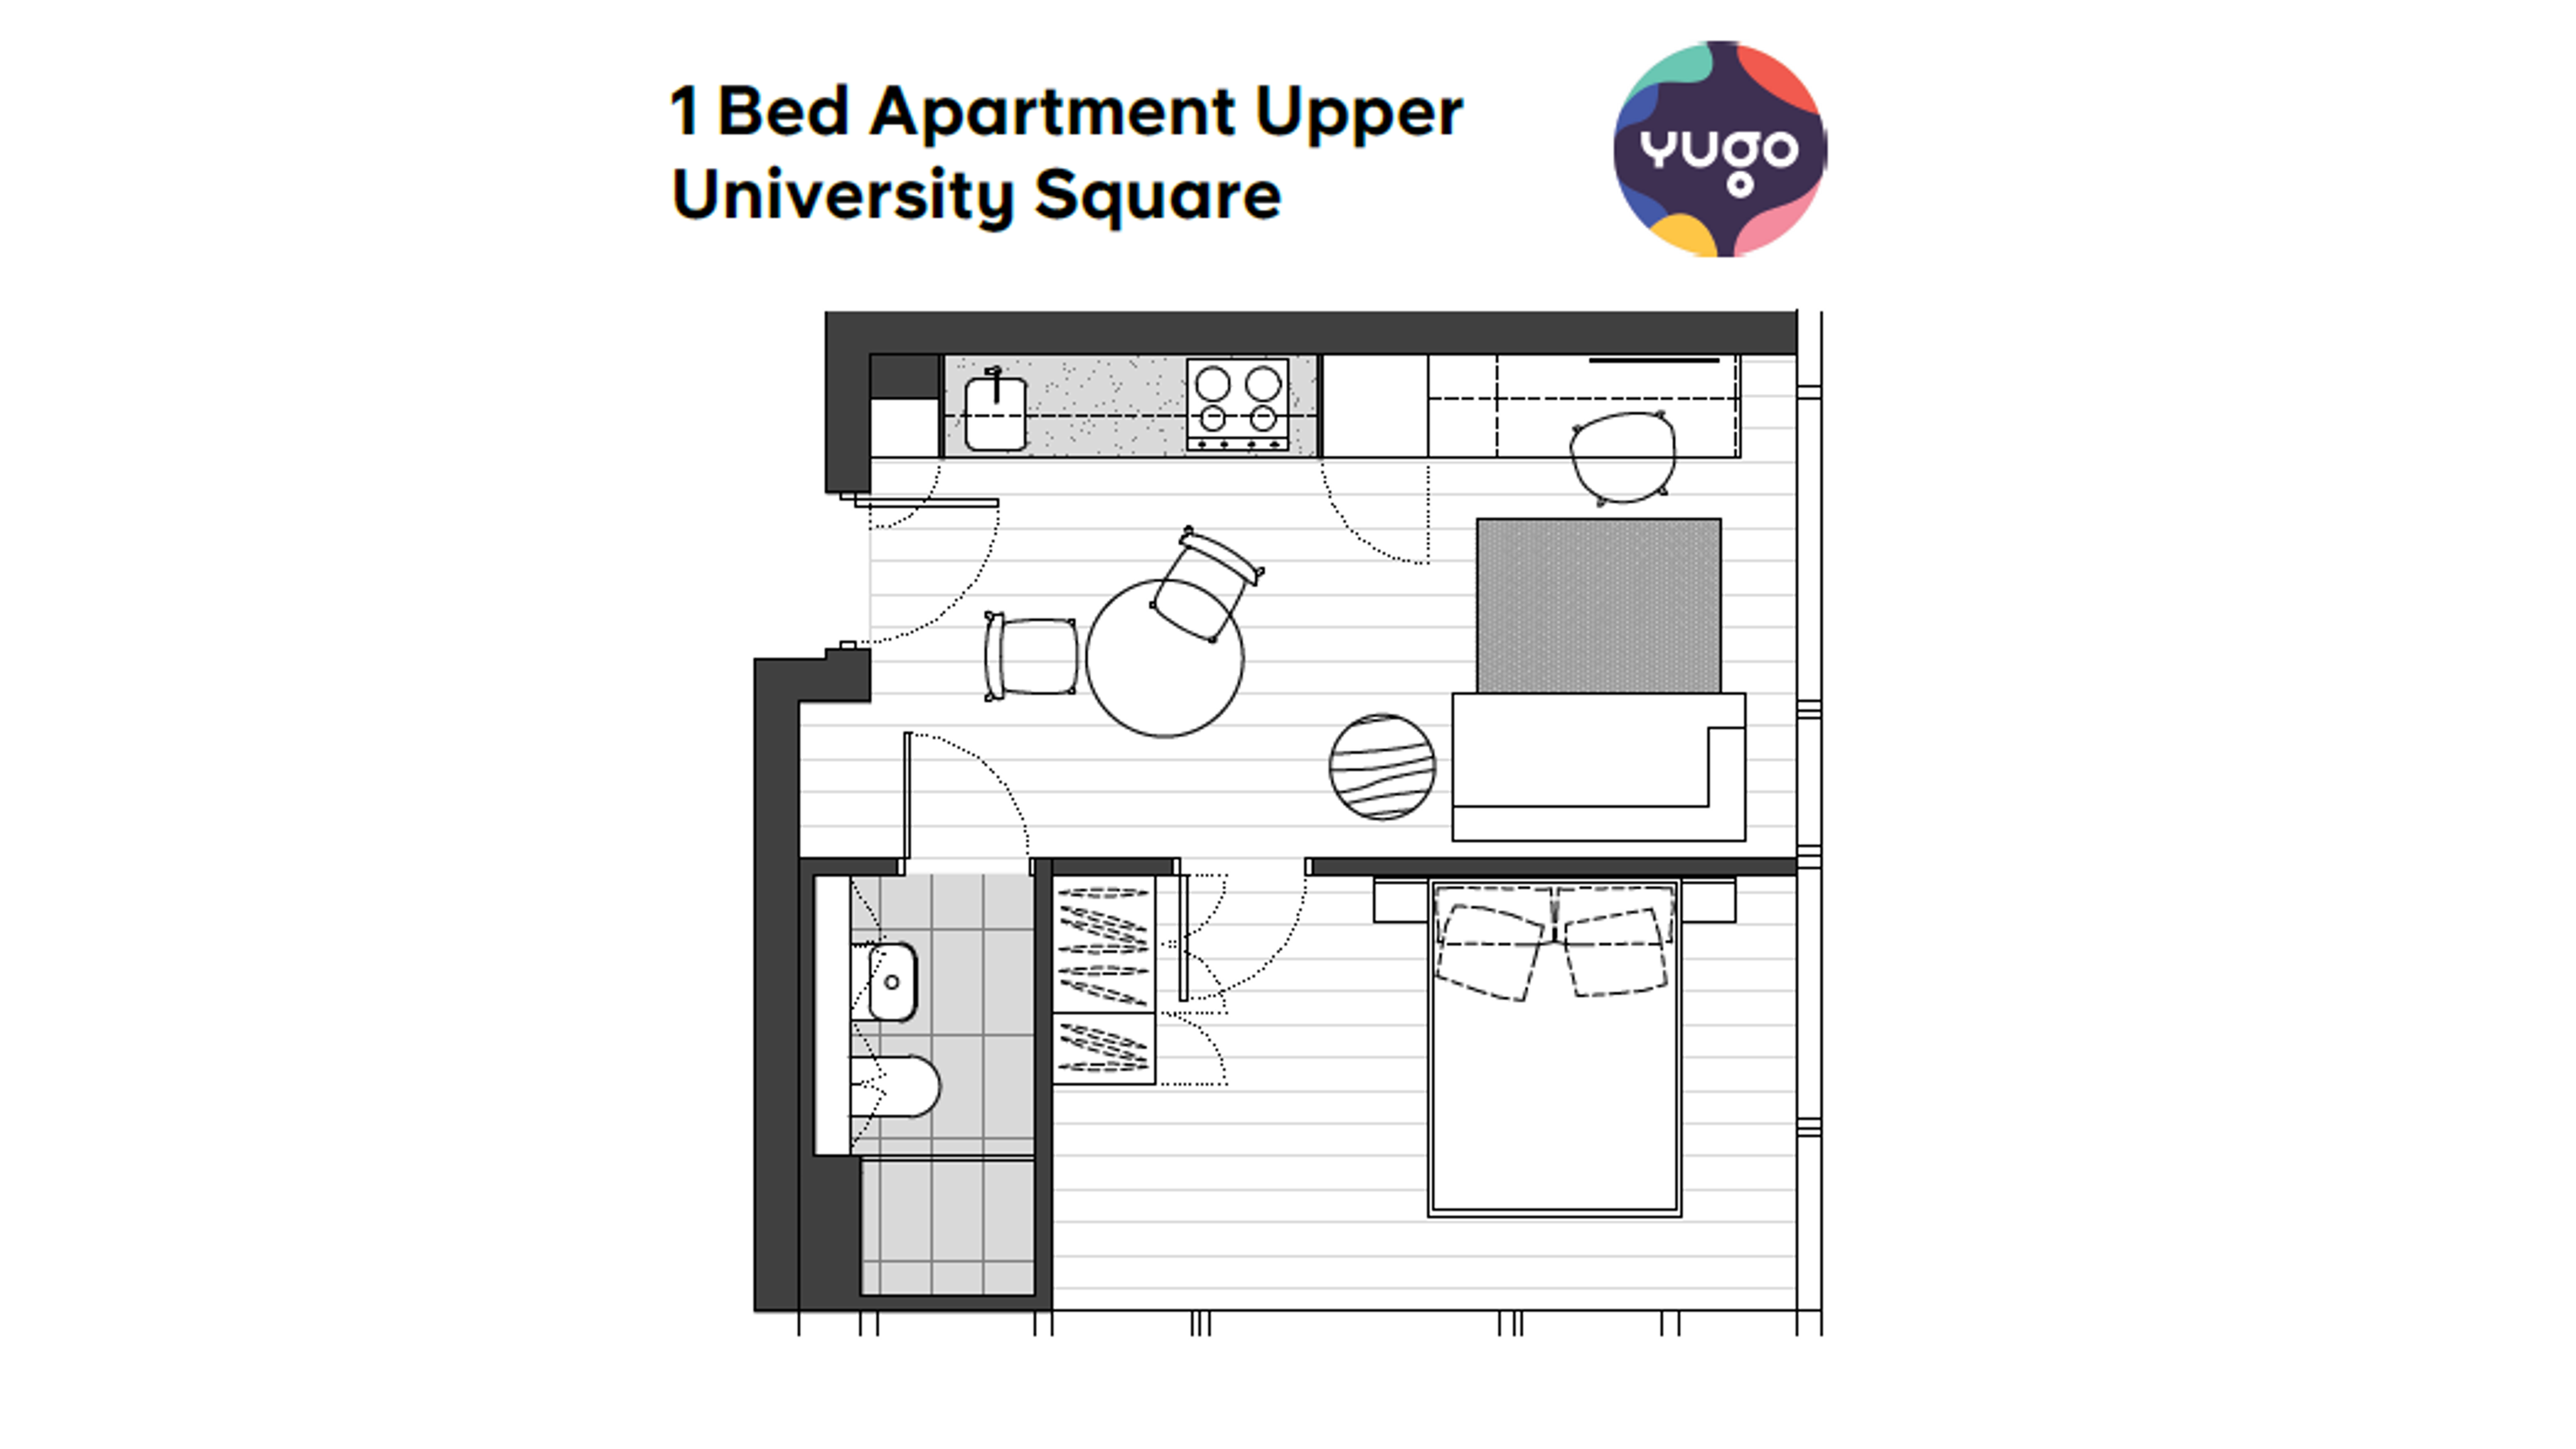 1 Bed Apartment Upper image